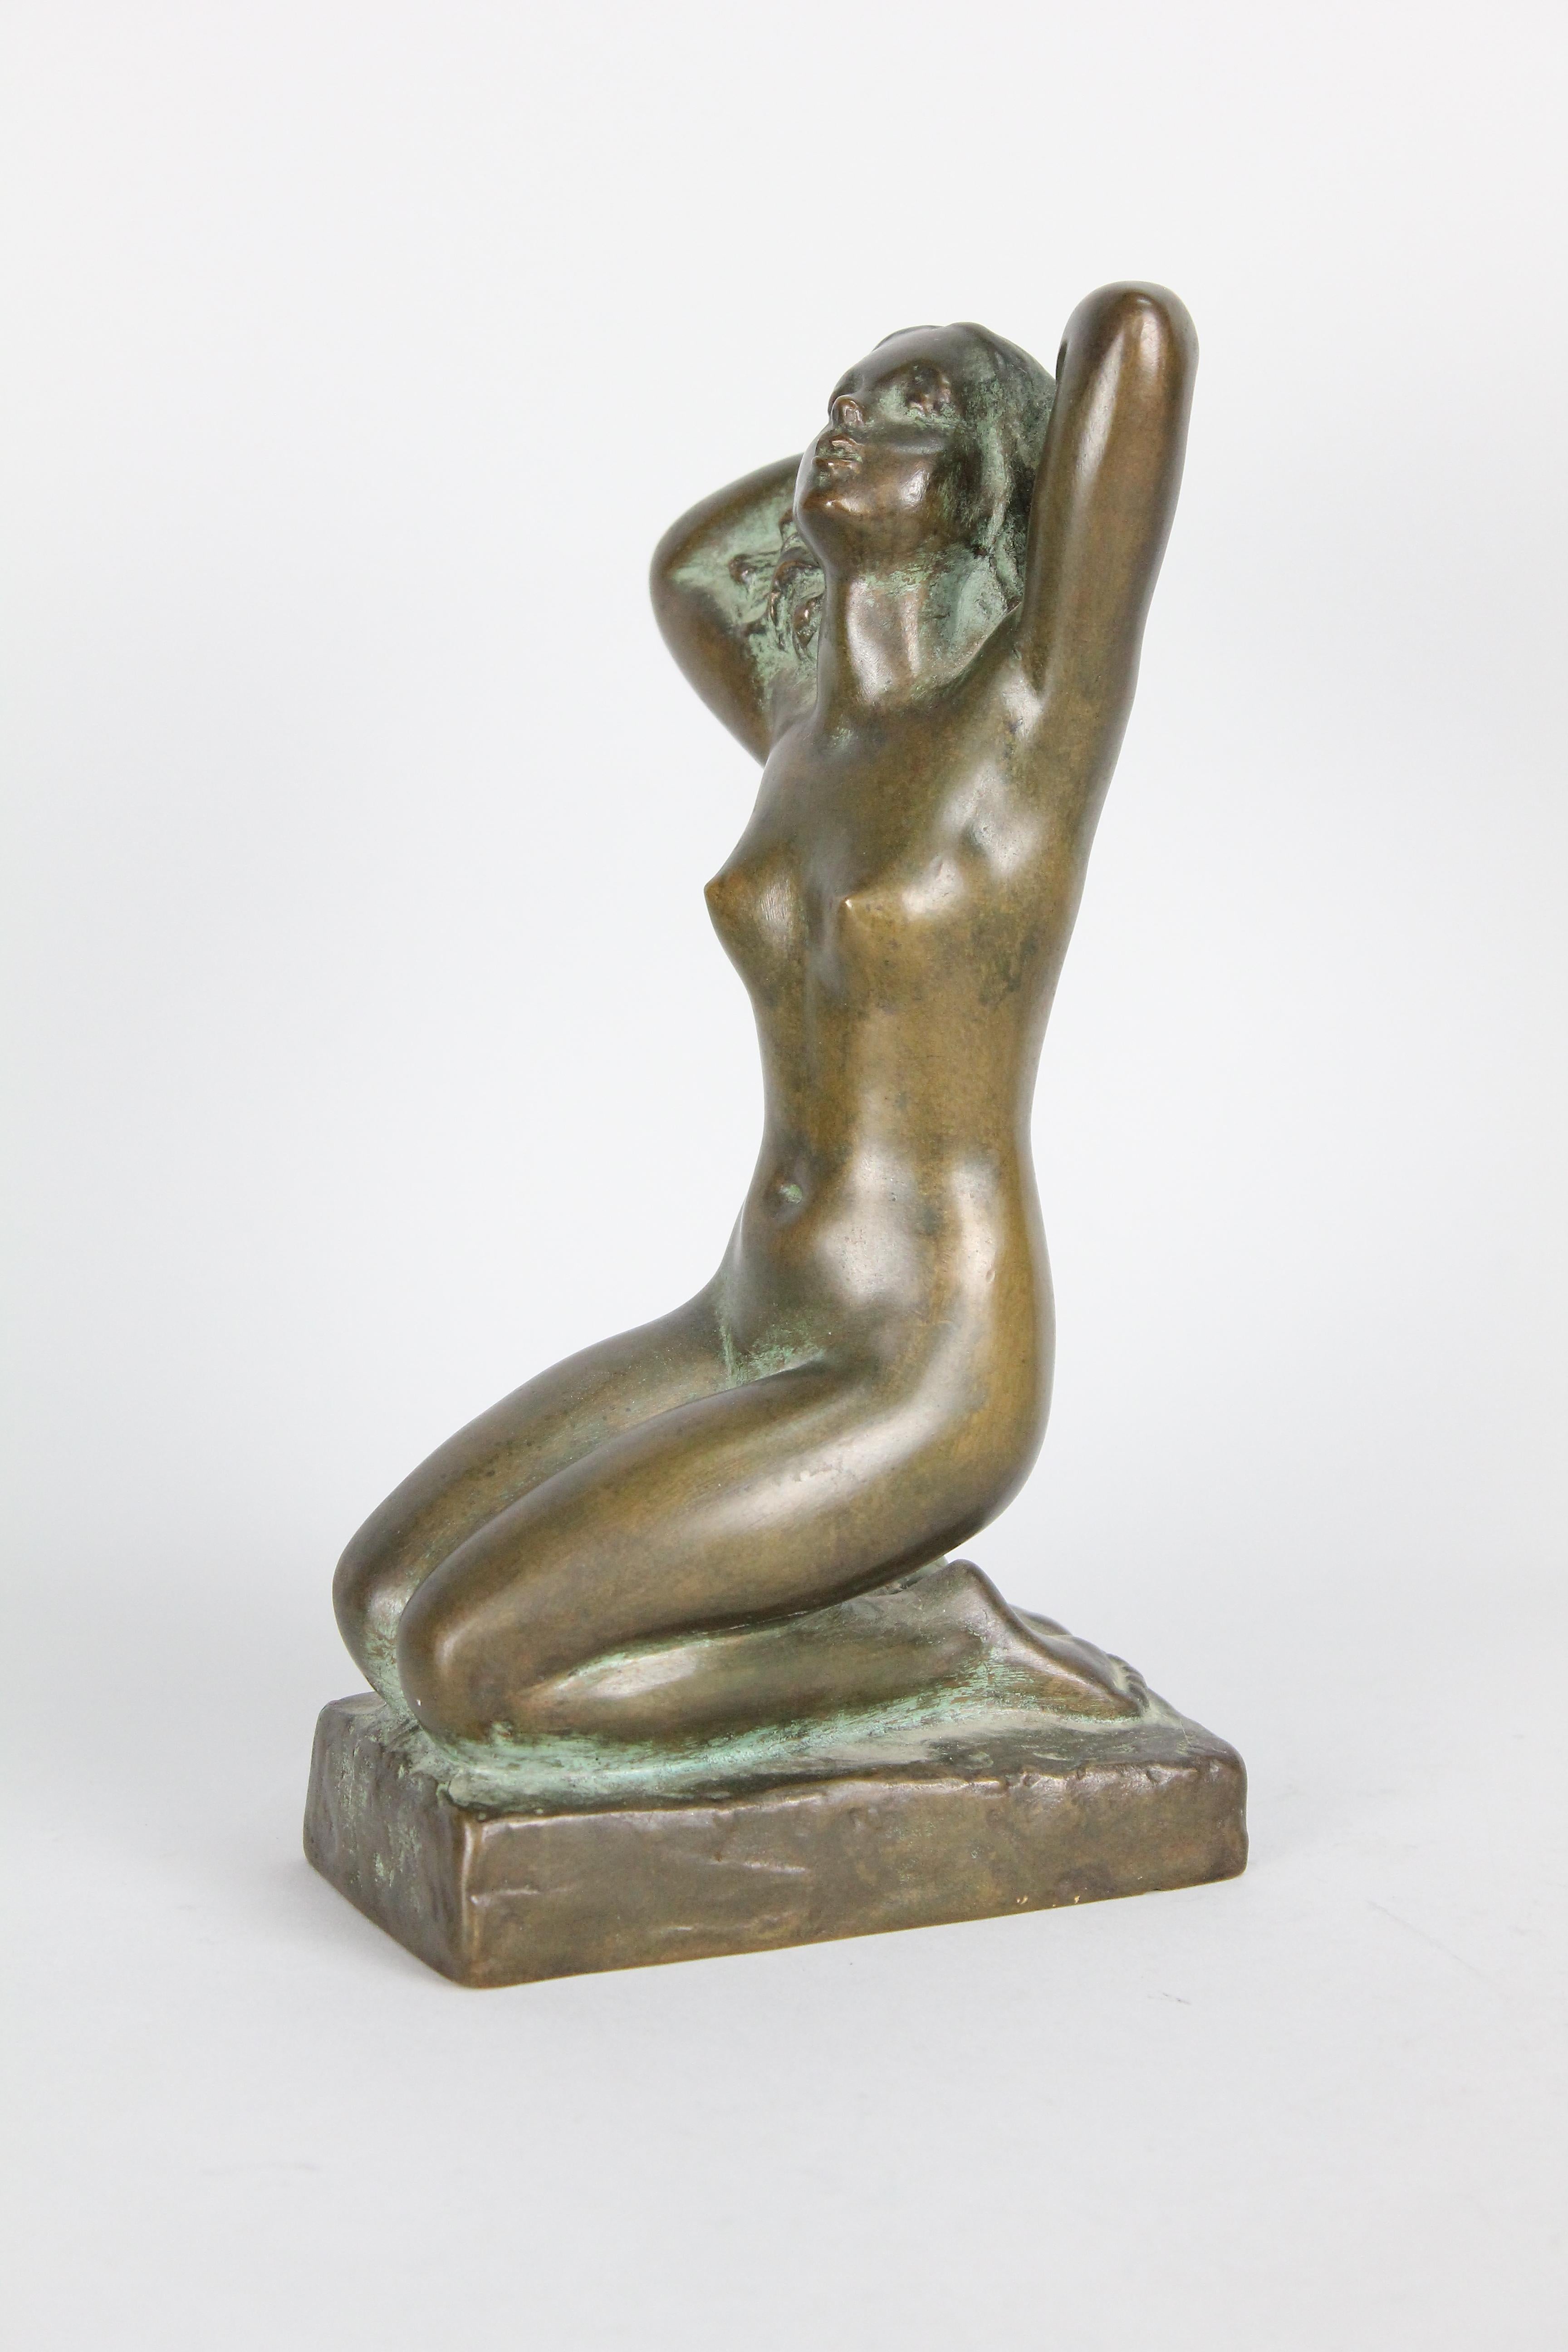 Very nice bronze sculpture of a nude girl with her arms over her head.
It is signed 